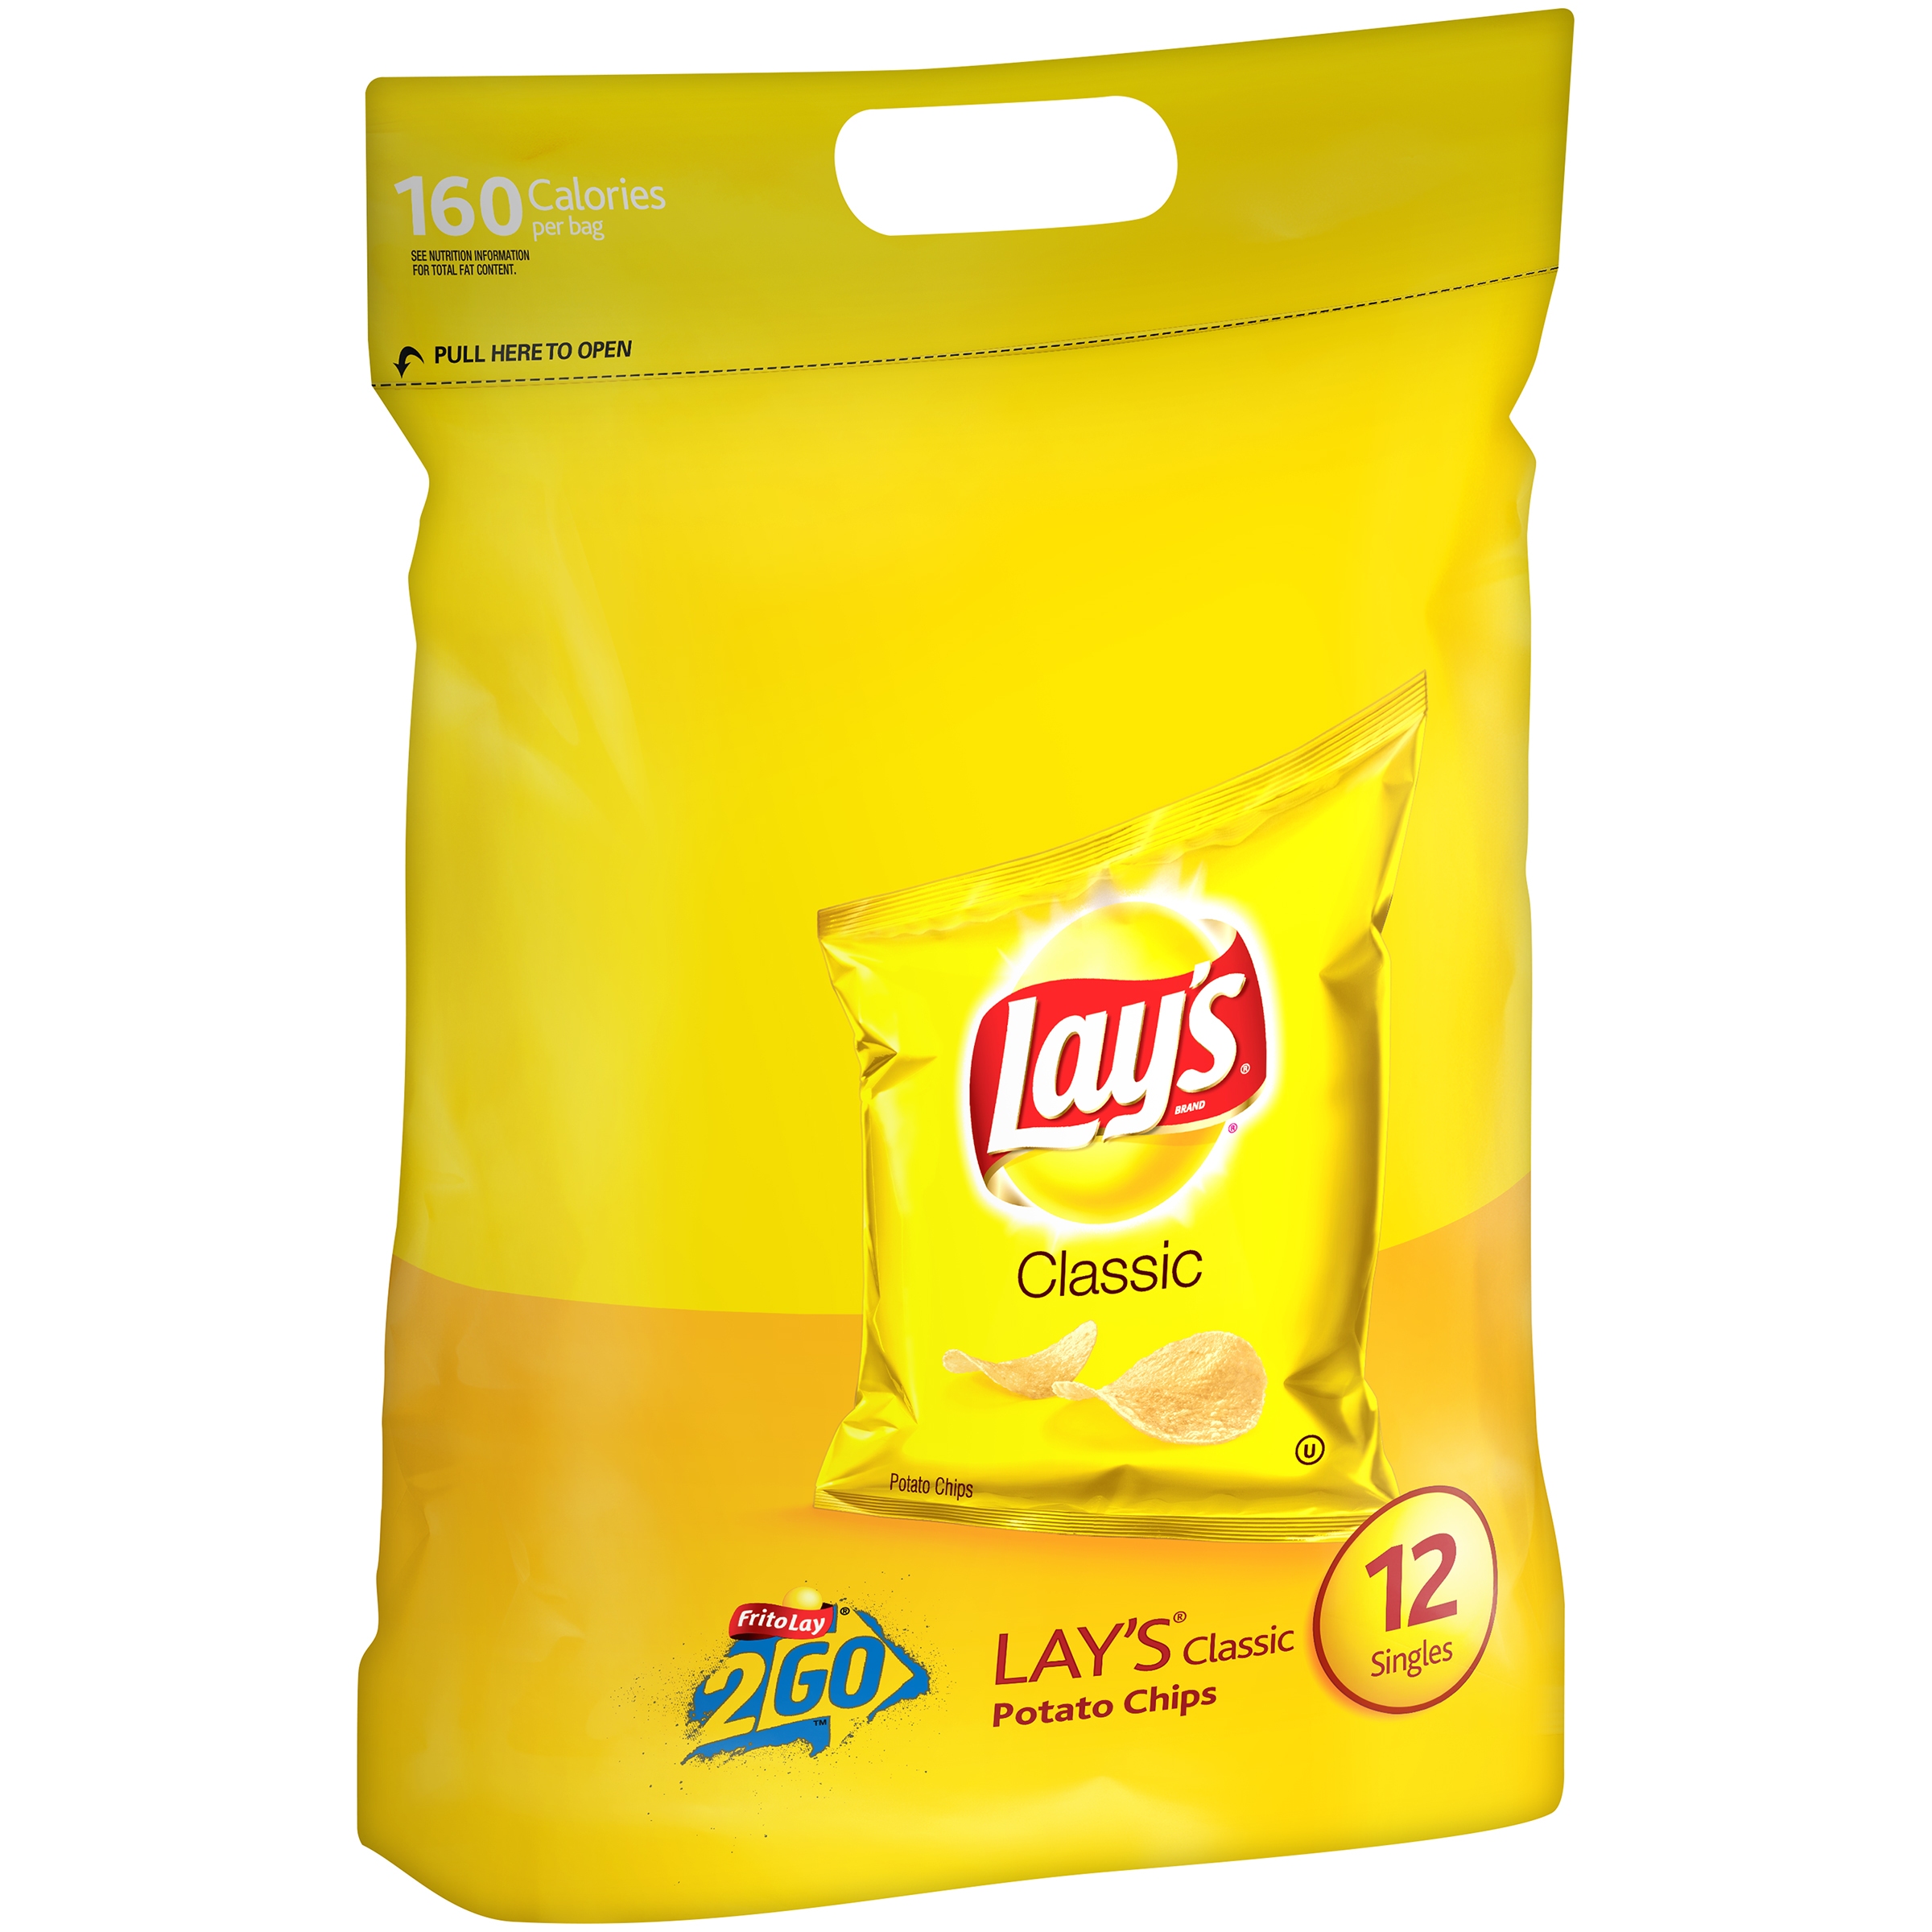 Lay's Classic Potato Chips, 12 count, 1 oz Bags - image 1 of 5